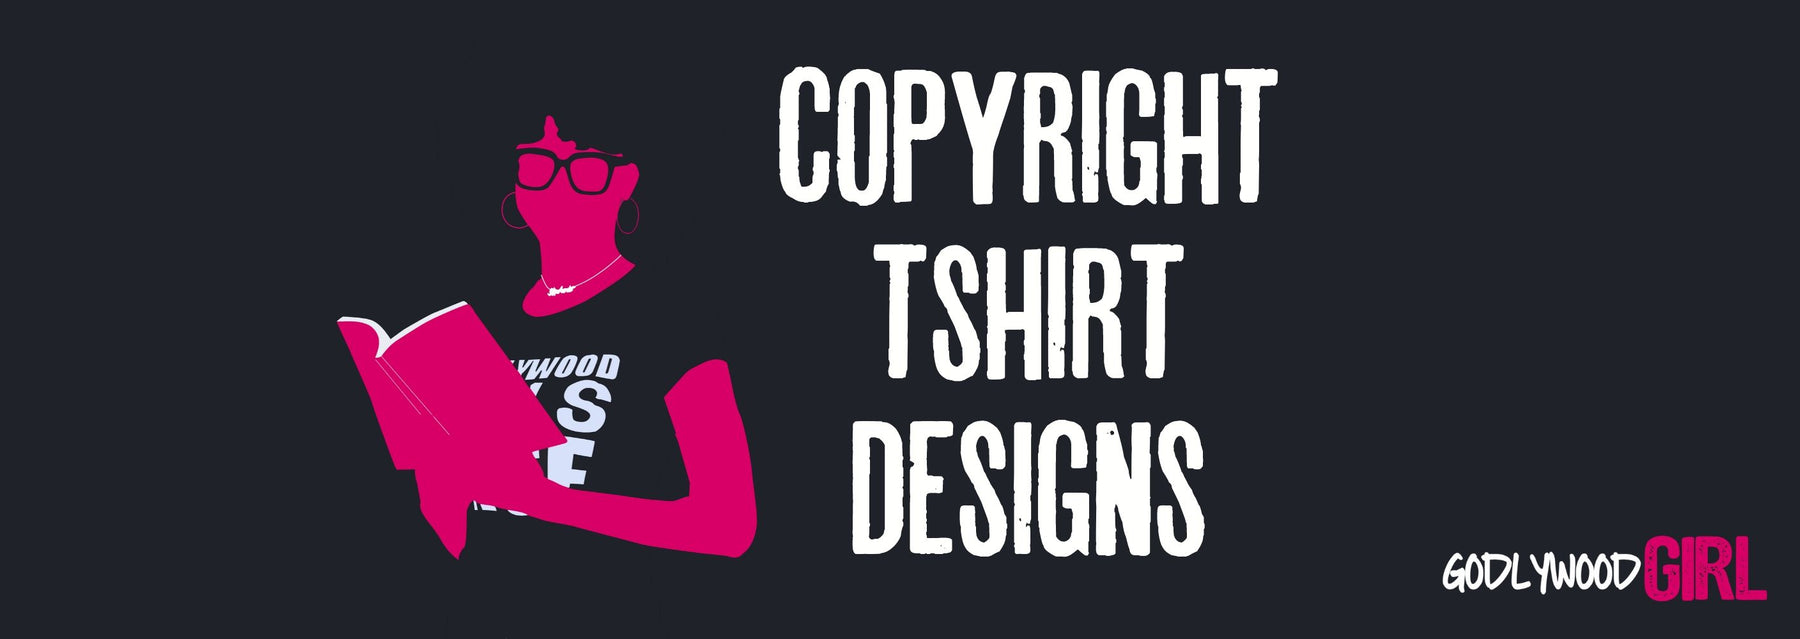 HOW TO COPYRIGHT YOUR T-SHIRT BUSINESS DESIGNS | Business Licenses | LLC Proprietorship | Trademark